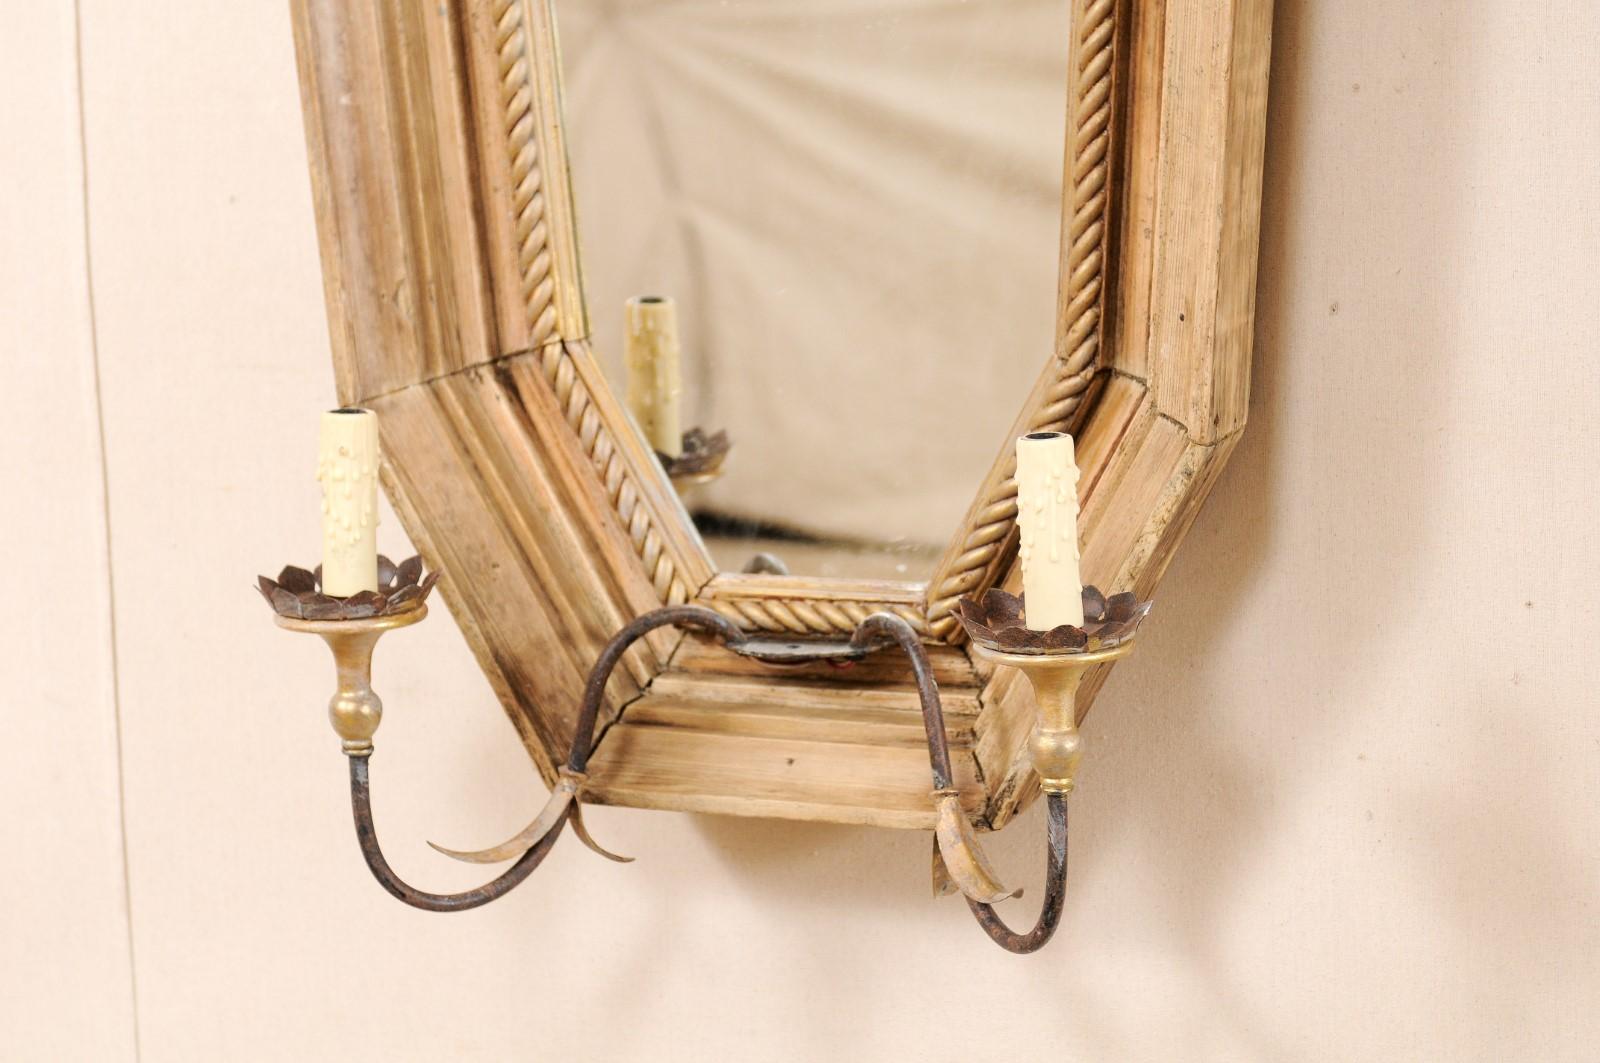 Italian Mid-20th Century Sconces with Large Mirrored Back-Plate 4